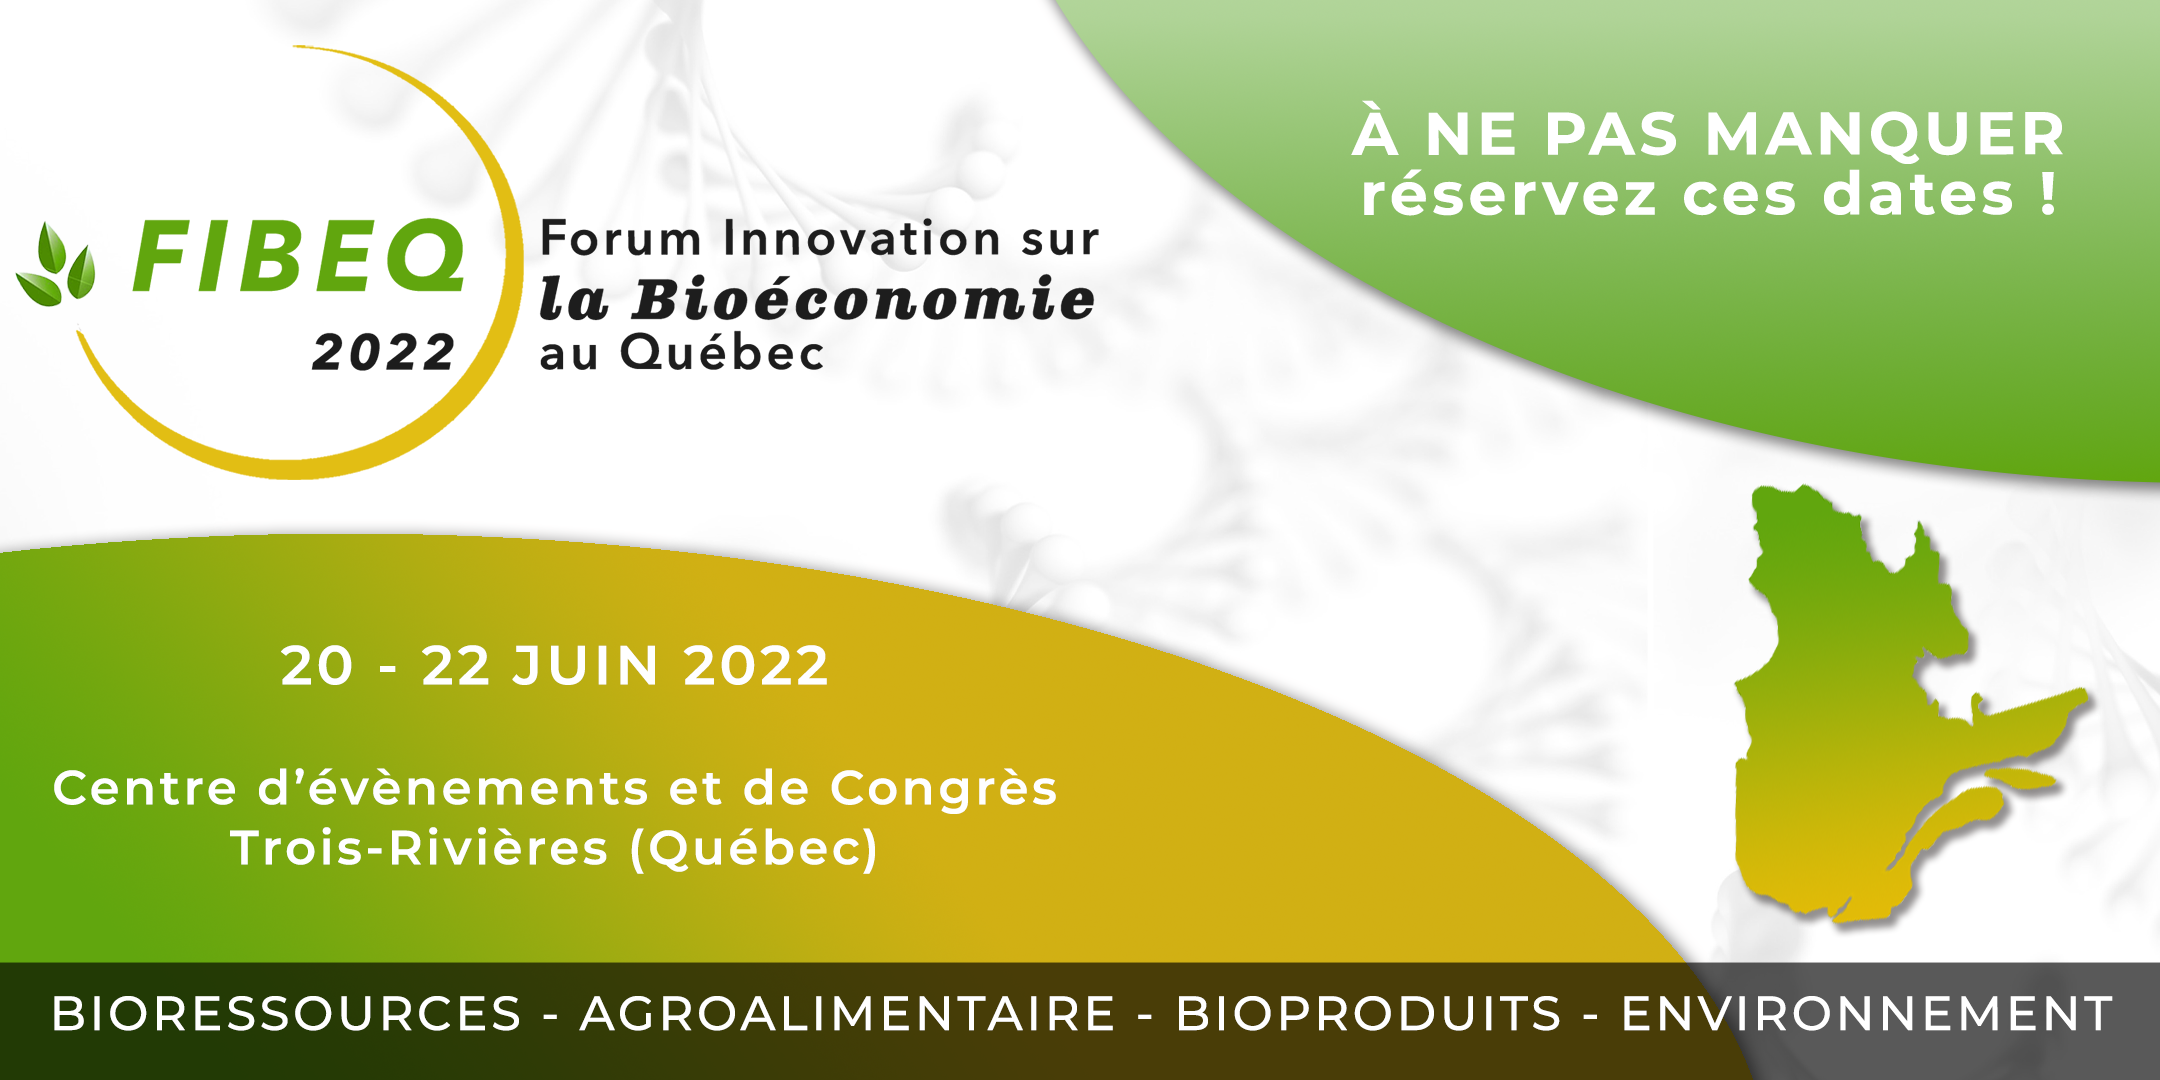 Second edition of the Innovation Forum on the biobased economy in Quebec